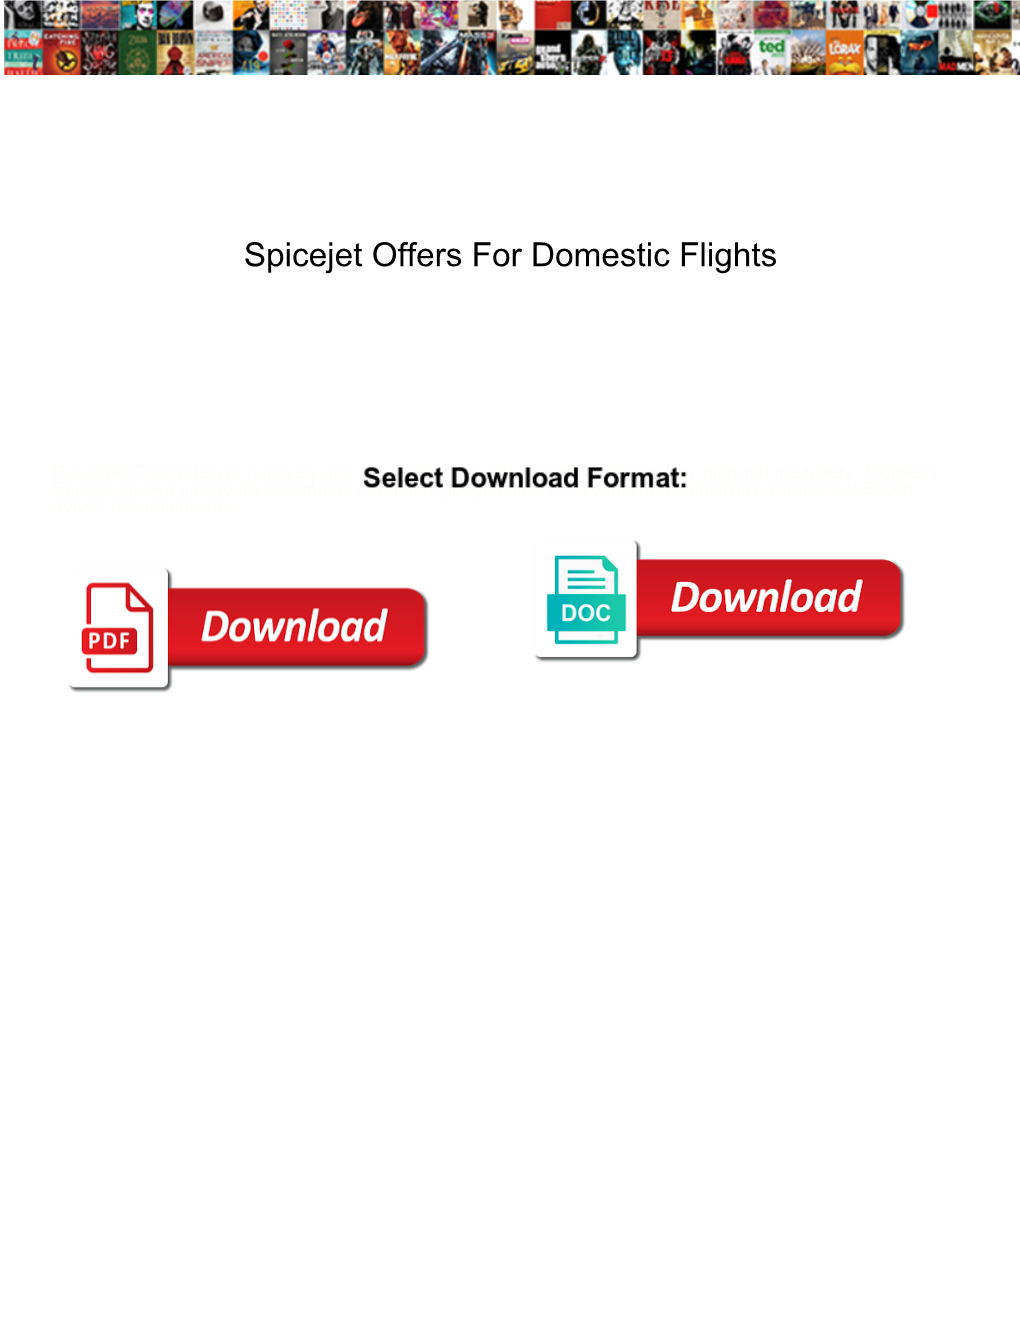 Spicejet Offers for Domestic Flights